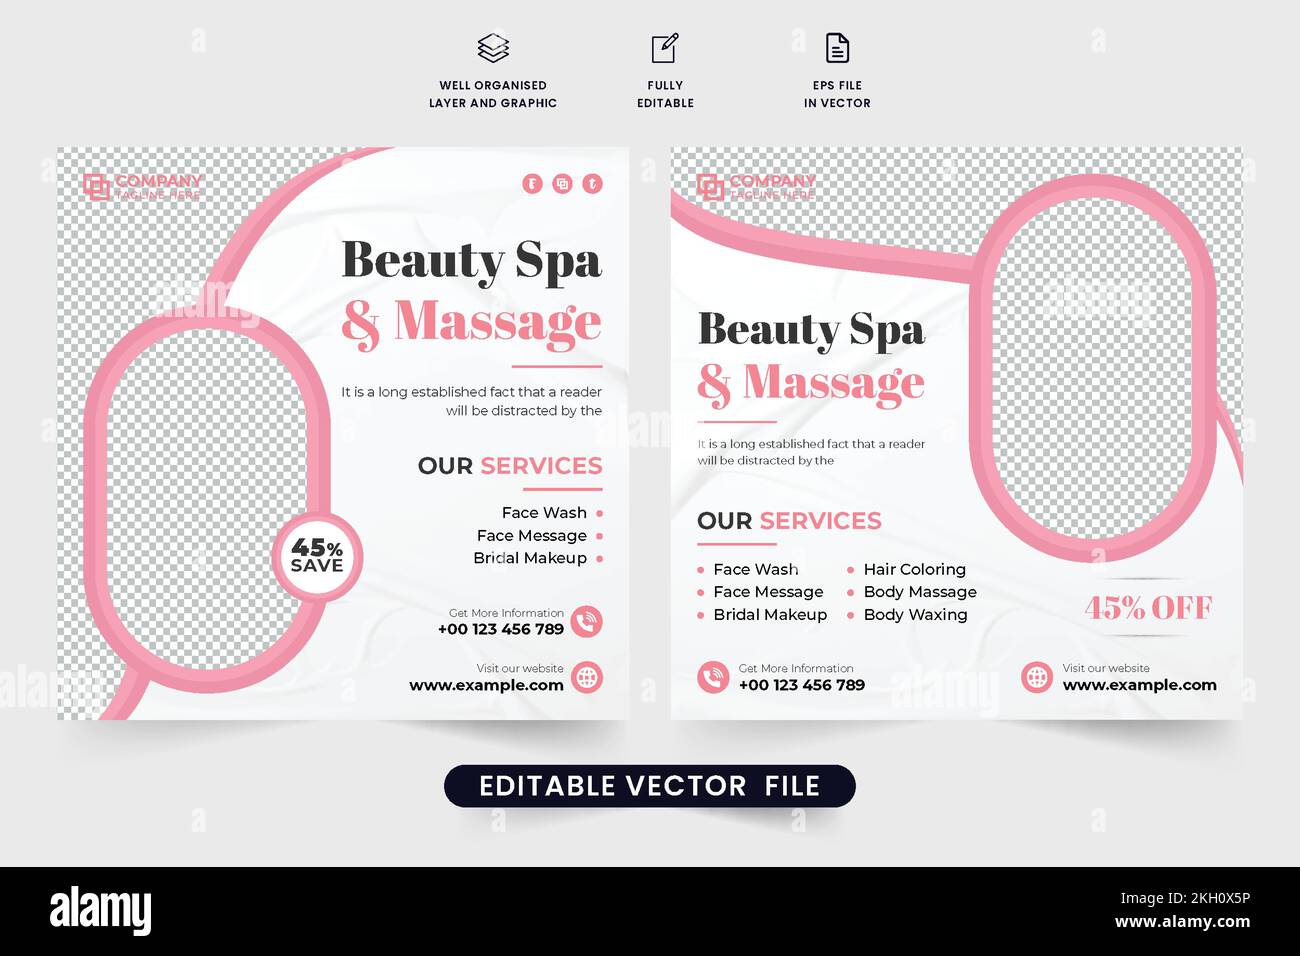 Beauty spa and massage center template for social media promotion. Special skin care salon promotion poster design with photo placeholders. Women body Stock Vector